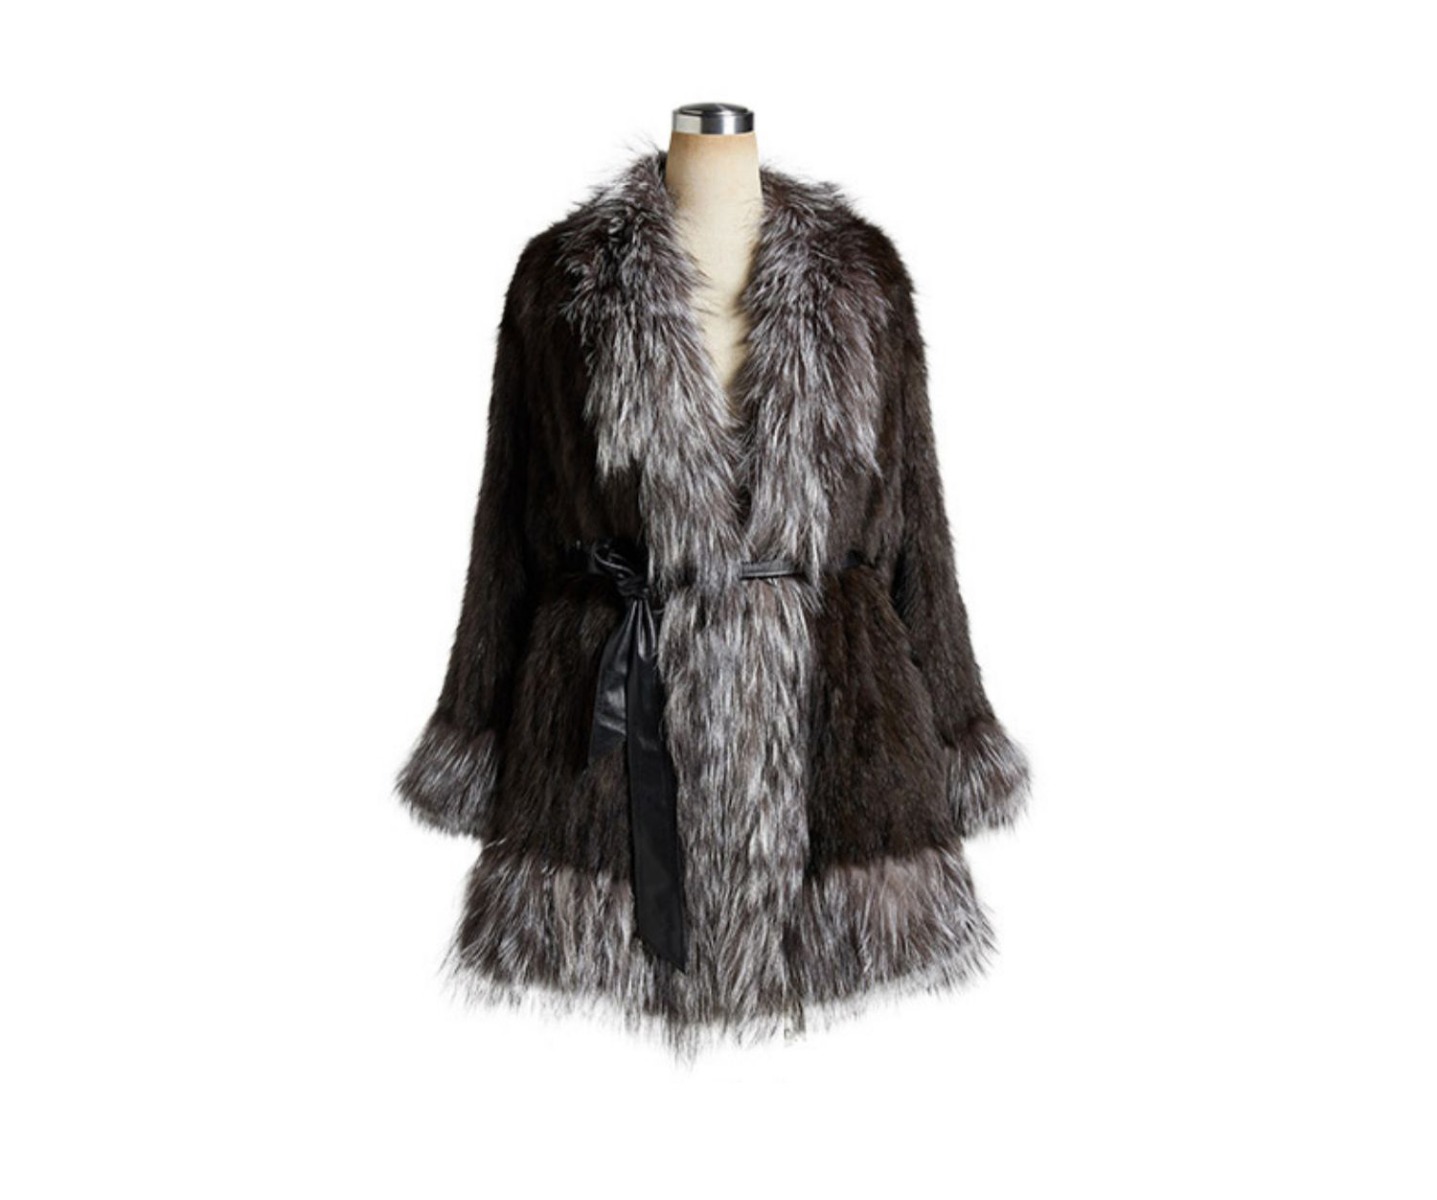 Women's Sable Fur Knitted Coat with Silver Fox Fur Trim 0248-1